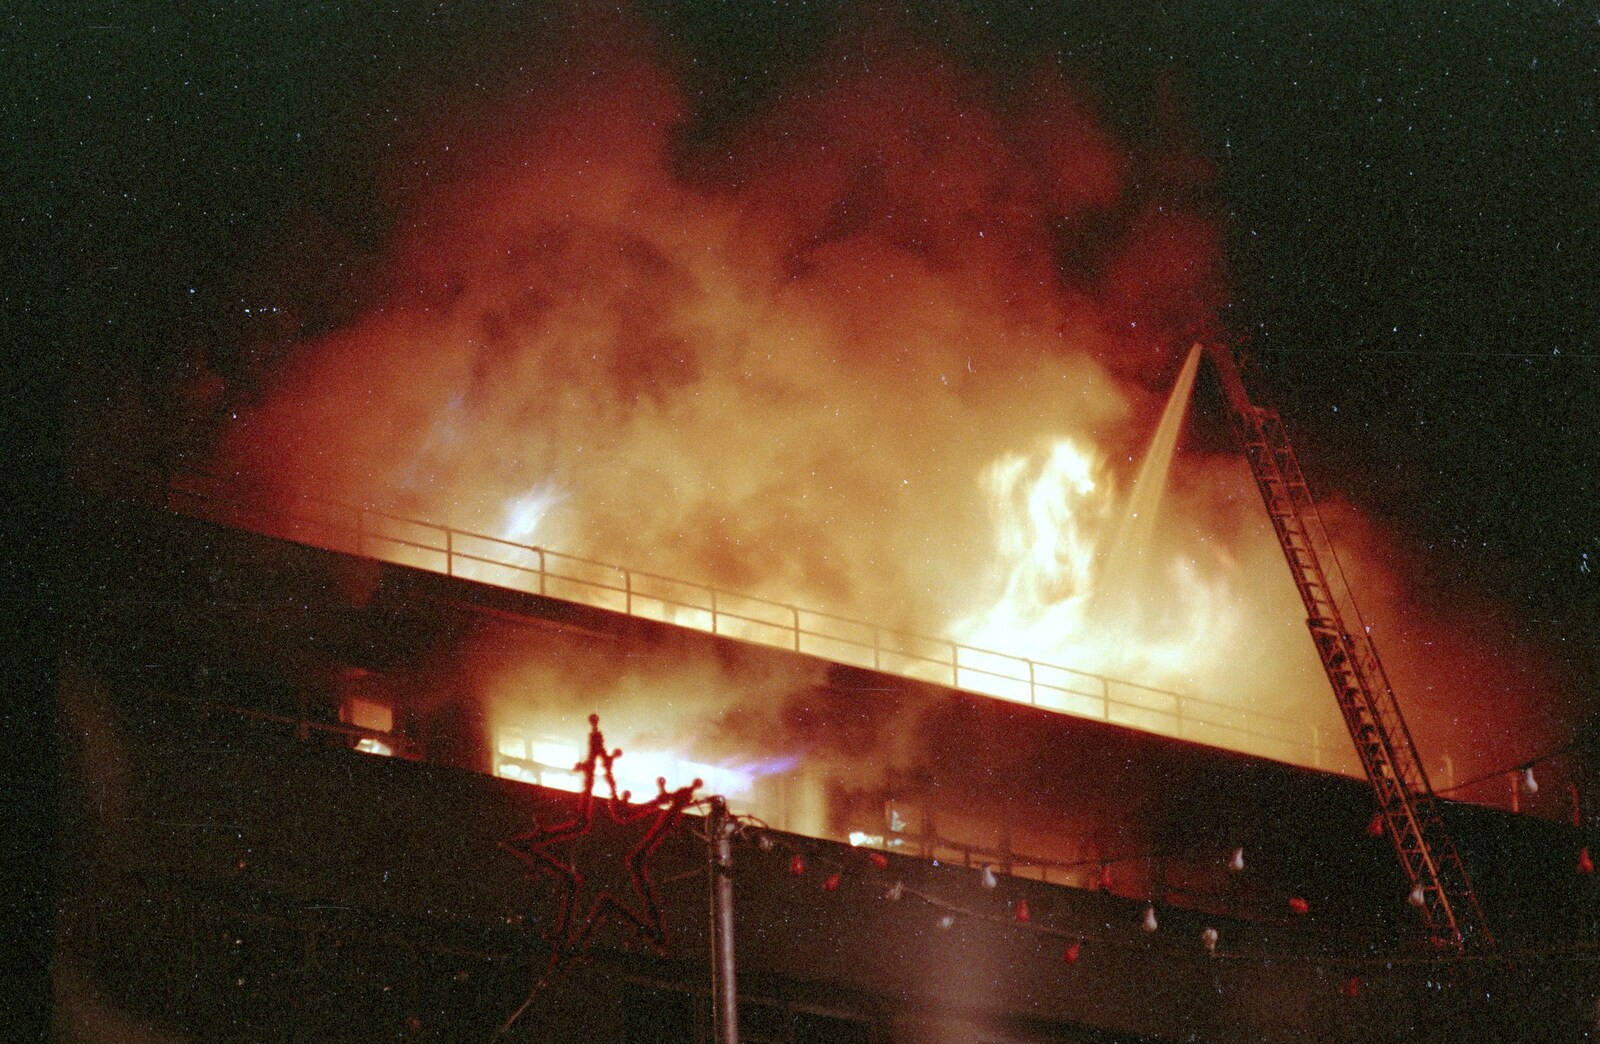 A fire hose sprays down into the flames from Uni: The Fire-Bombing of Dingles, Plymouth, Devon - 19th December 1988